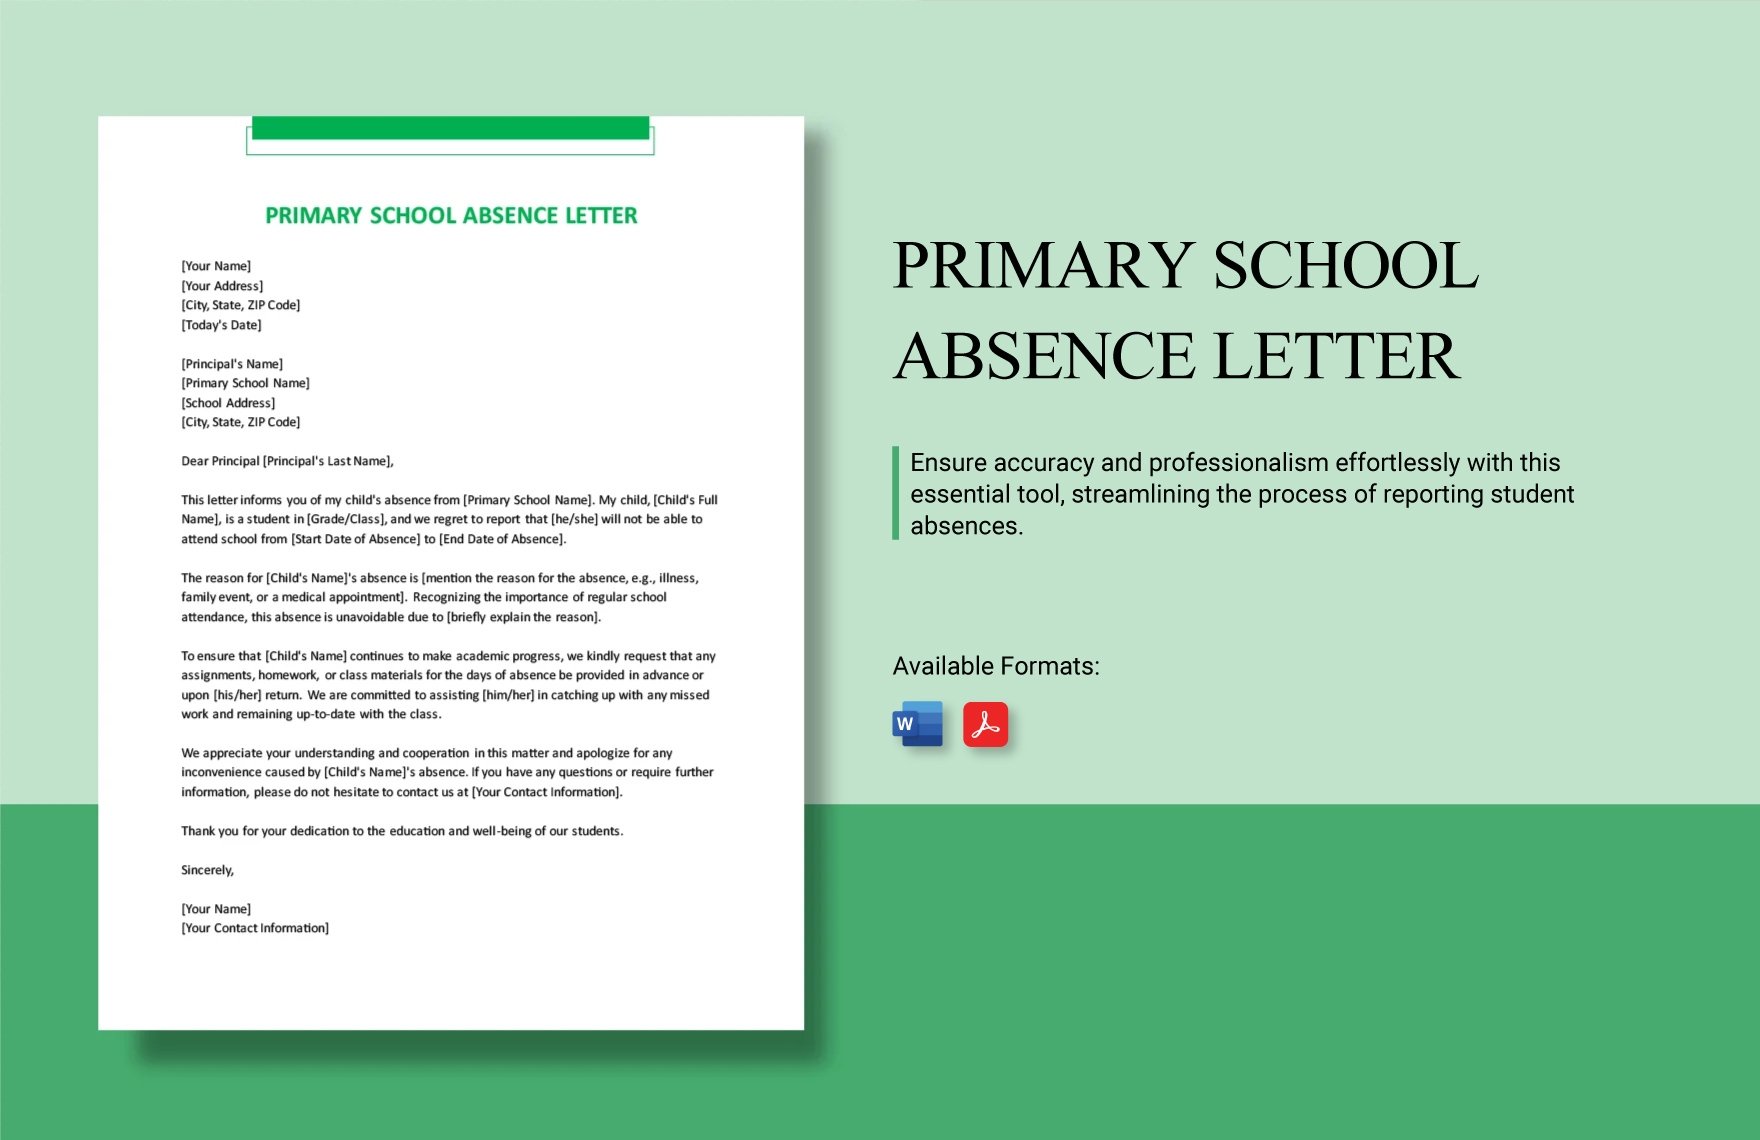 Primary School Absence Letter in Word, PDF